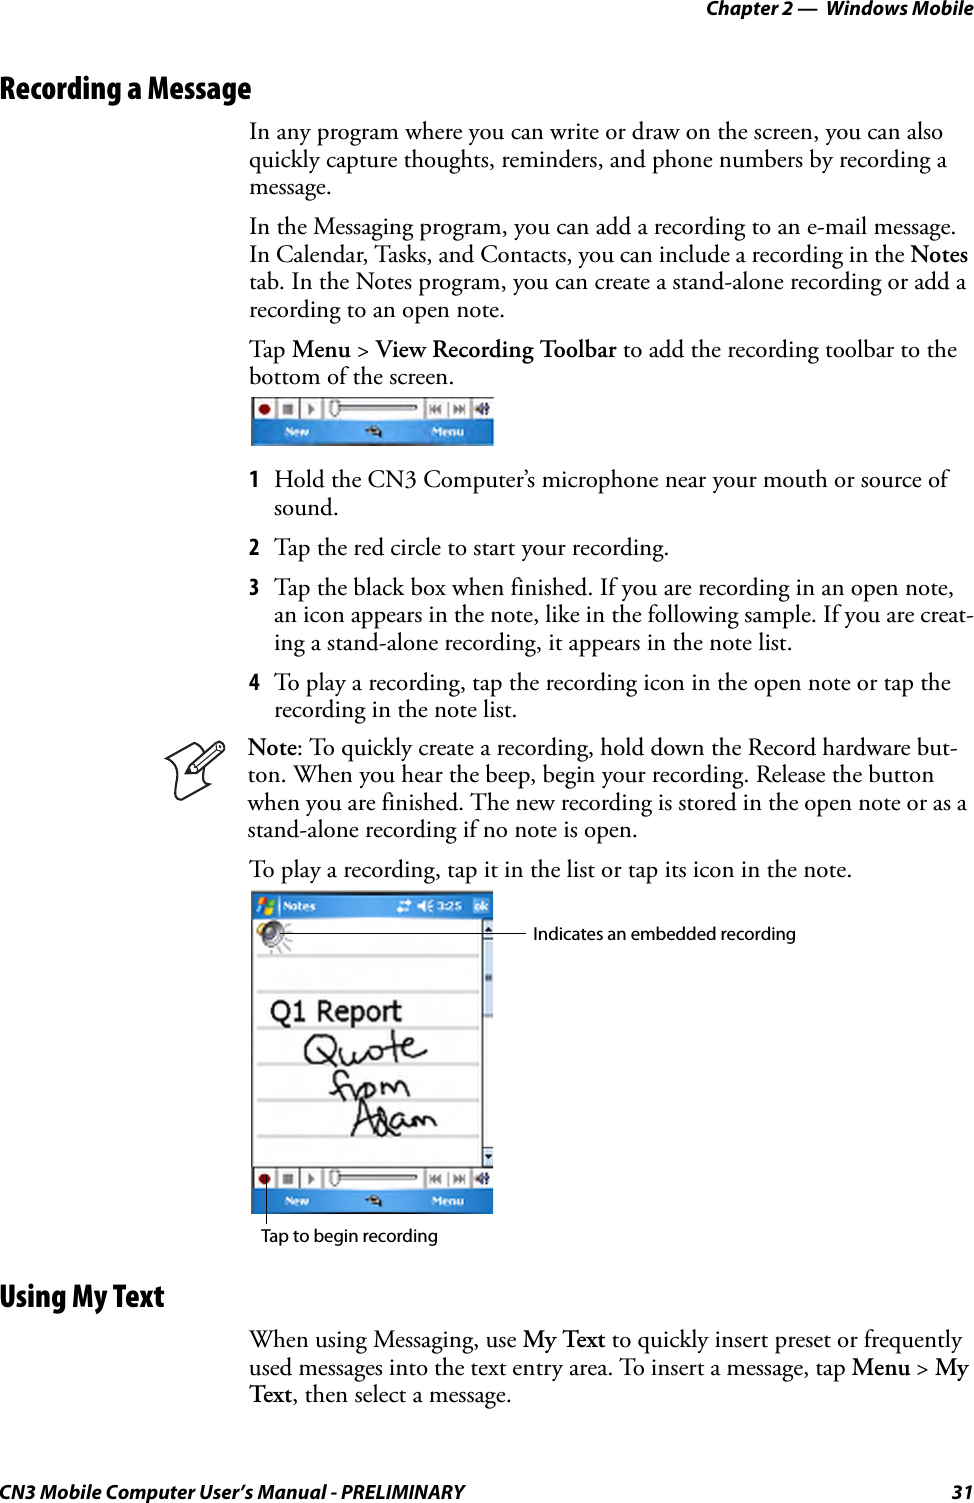 Chapter 2 —  Windows MobileCN3 Mobile Computer User’s Manual - PRELIMINARY 31Recording a MessageIn any program where you can write or draw on the screen, you can also quickly capture thoughts, reminders, and phone numbers by recording a message. In the Messaging program, you can add a recording to an e-mail message. In Calendar, Tasks, and Contacts, you can include a recording in the Notes tab. In the Notes program, you can create a stand-alone recording or add a recording to an open note.Tap Menu &gt; View Recording Toolbar to add the recording toolbar to the bottom of the screen.1Hold the CN3 Computer’s microphone near your mouth or source of sound.2Tap the red circle to start your recording.3Tap the black box when finished. If you are recording in an open note, an icon appears in the note, like in the following sample. If you are creat-ing a stand-alone recording, it appears in the note list.4To play a recording, tap the recording icon in the open note or tap the recording in the note list.To play a recording, tap it in the list or tap its icon in the note.Using My TextWhen using Messaging, use My Text to quickly insert preset or frequently used messages into the text entry area. To insert a message, tap Menu &gt; My Text , then select a message.Note: To quickly create a recording, hold down the Record hardware but-ton. When you hear the beep, begin your recording. Release the button when you are finished. The new recording is stored in the open note or as a stand-alone recording if no note is open.Tap to begin recordingIndicates an embedded recording